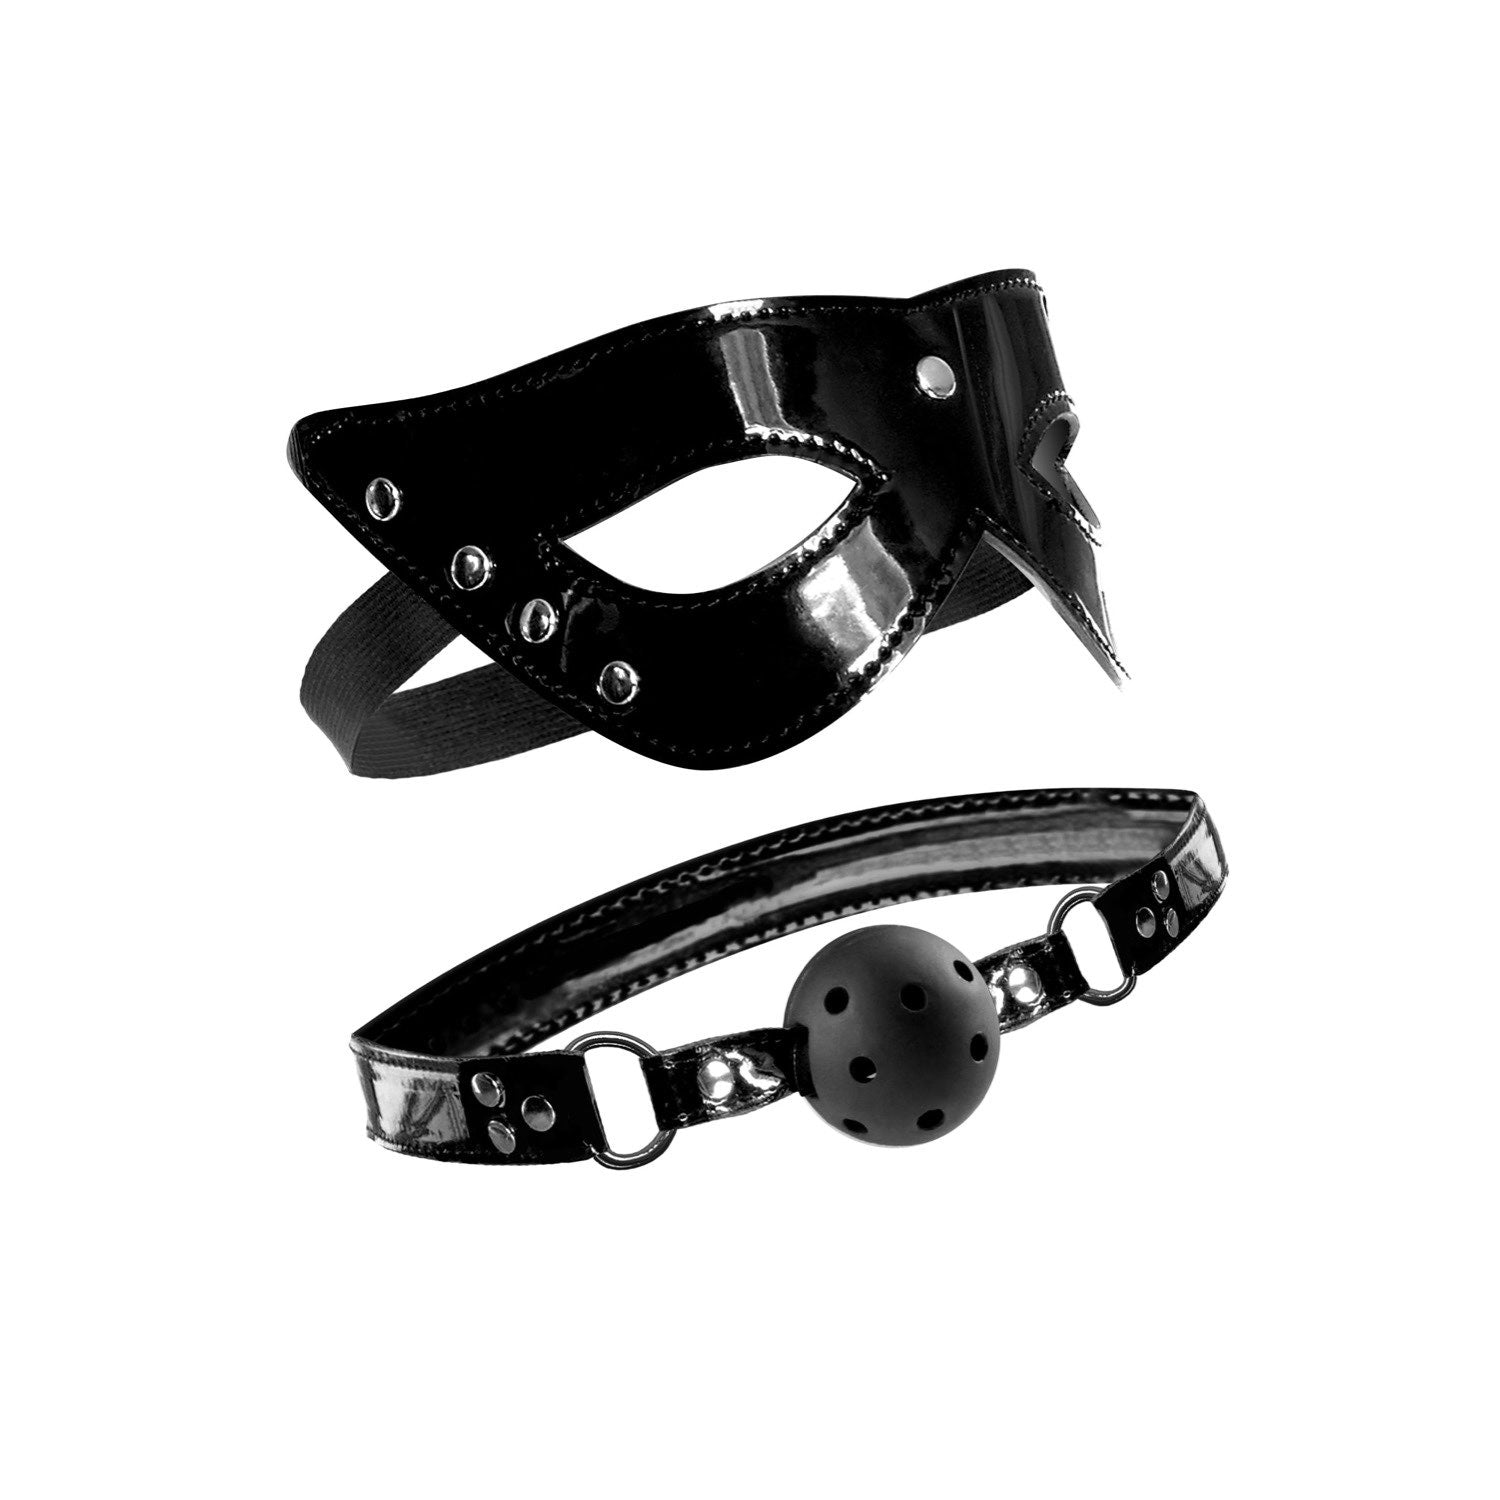 Fetish Fantasy Series Limited Edition Masquerade Mask &amp; Ball Gag - Black Mask &amp; Mout Restraint - 2 Piece Set by Pipedream